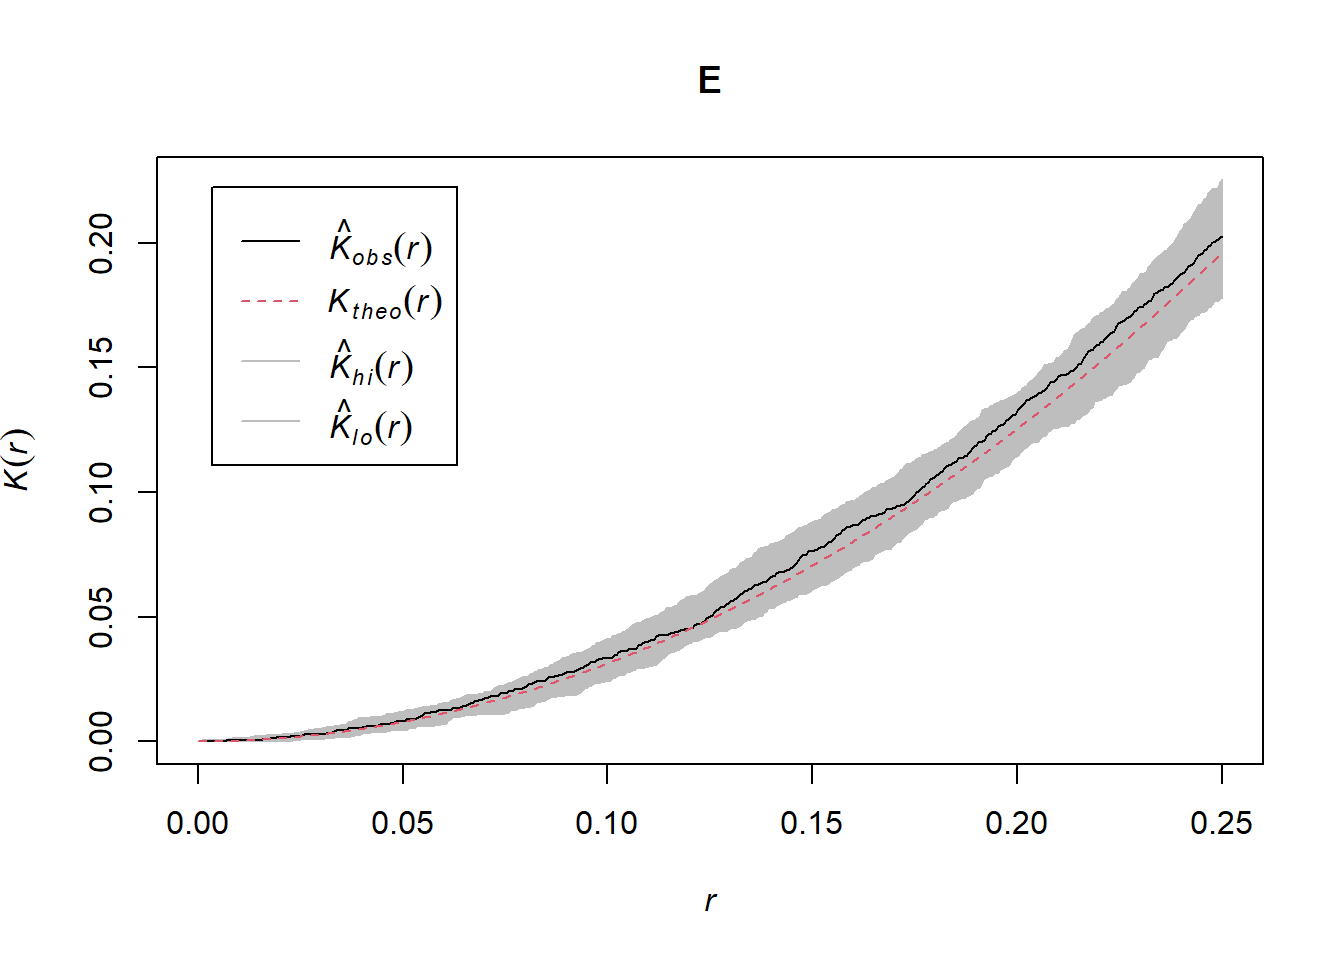 K-function of a simulated point pattern from a homogeneous Poisson process, together with an envelope corresponding to the K-functions of 99 simulated point patterns under CSR.